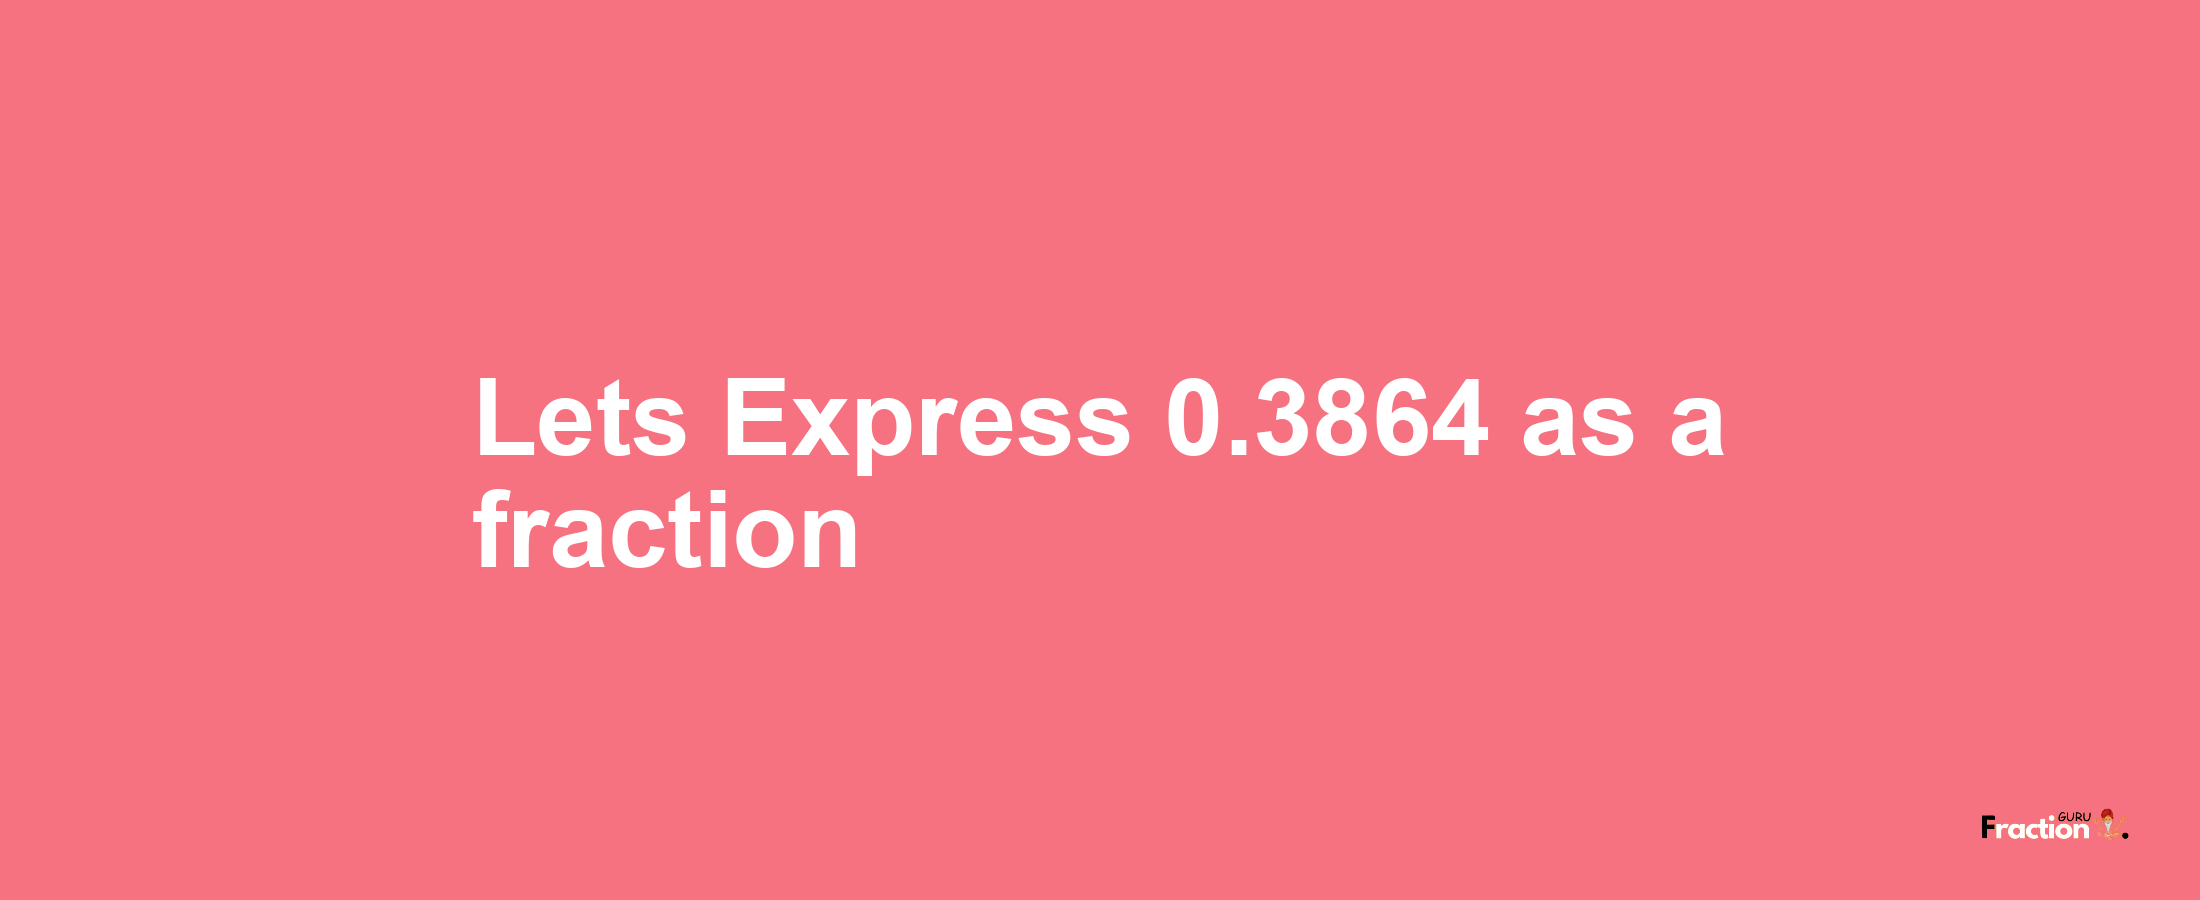 Lets Express 0.3864 as afraction